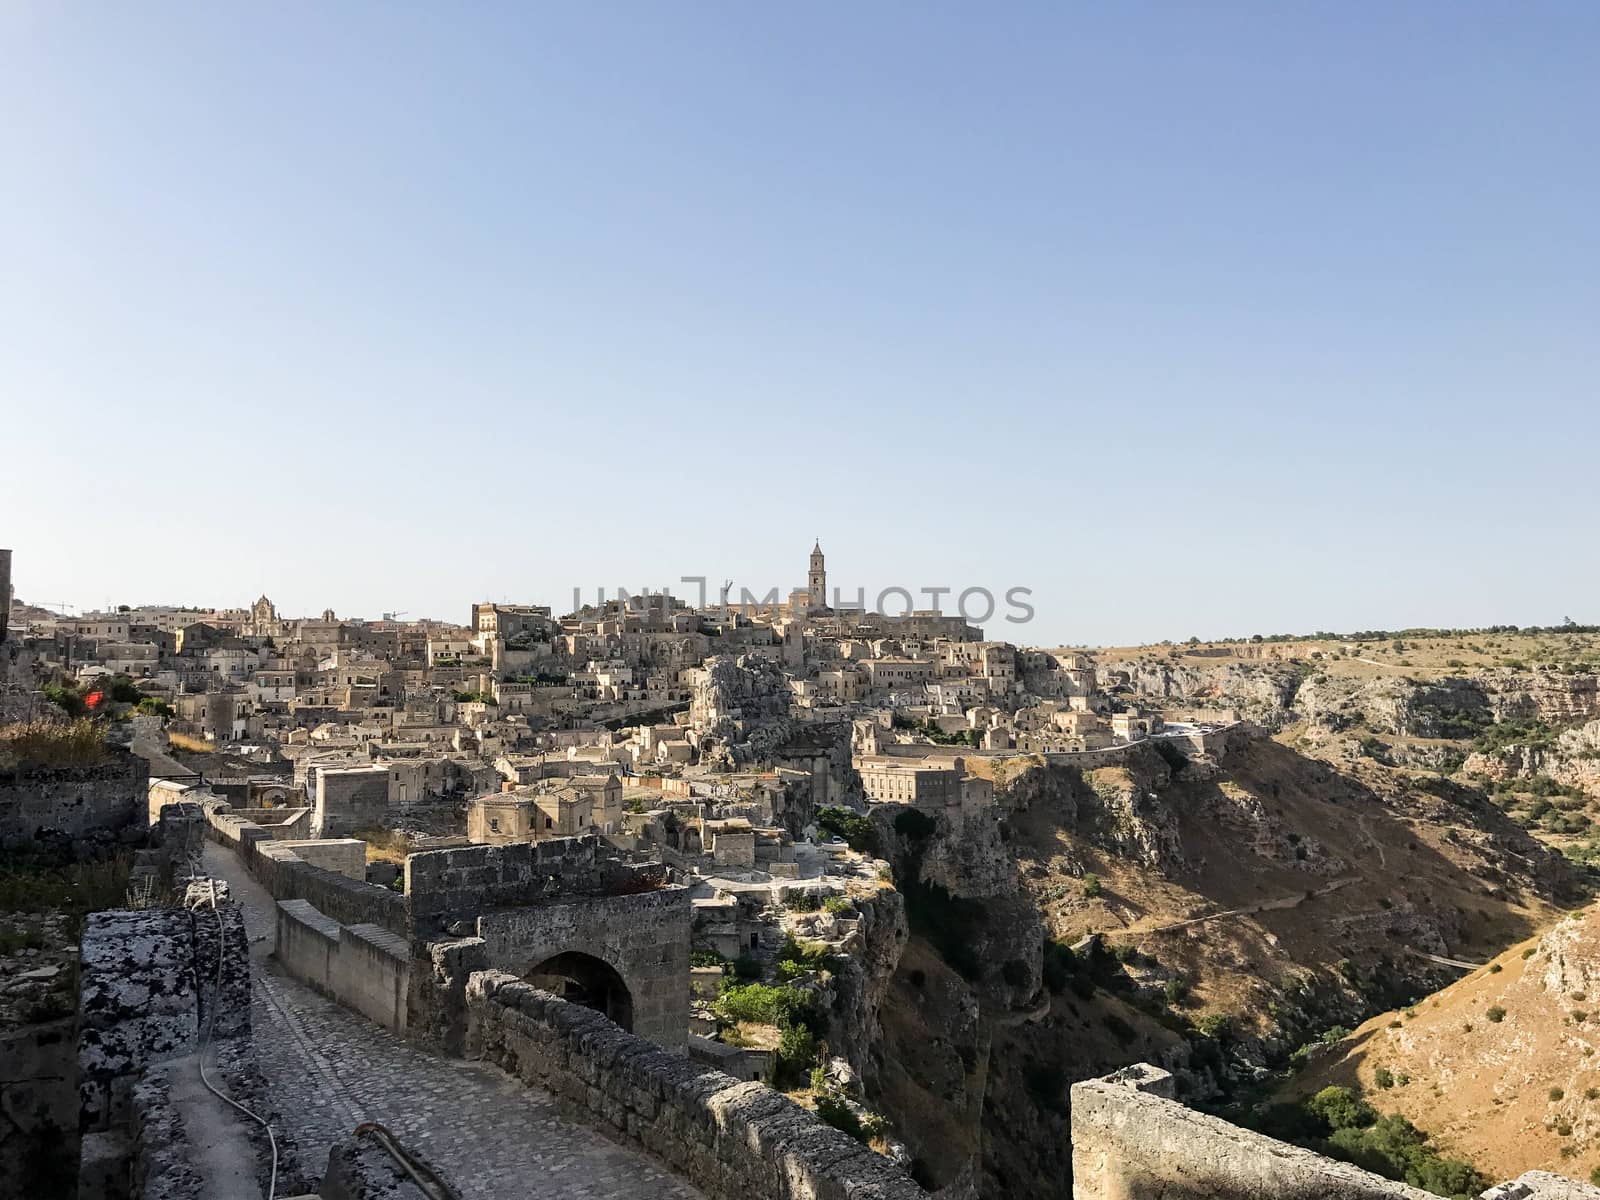 The old side of the town of Matera, Basilicata - Italy